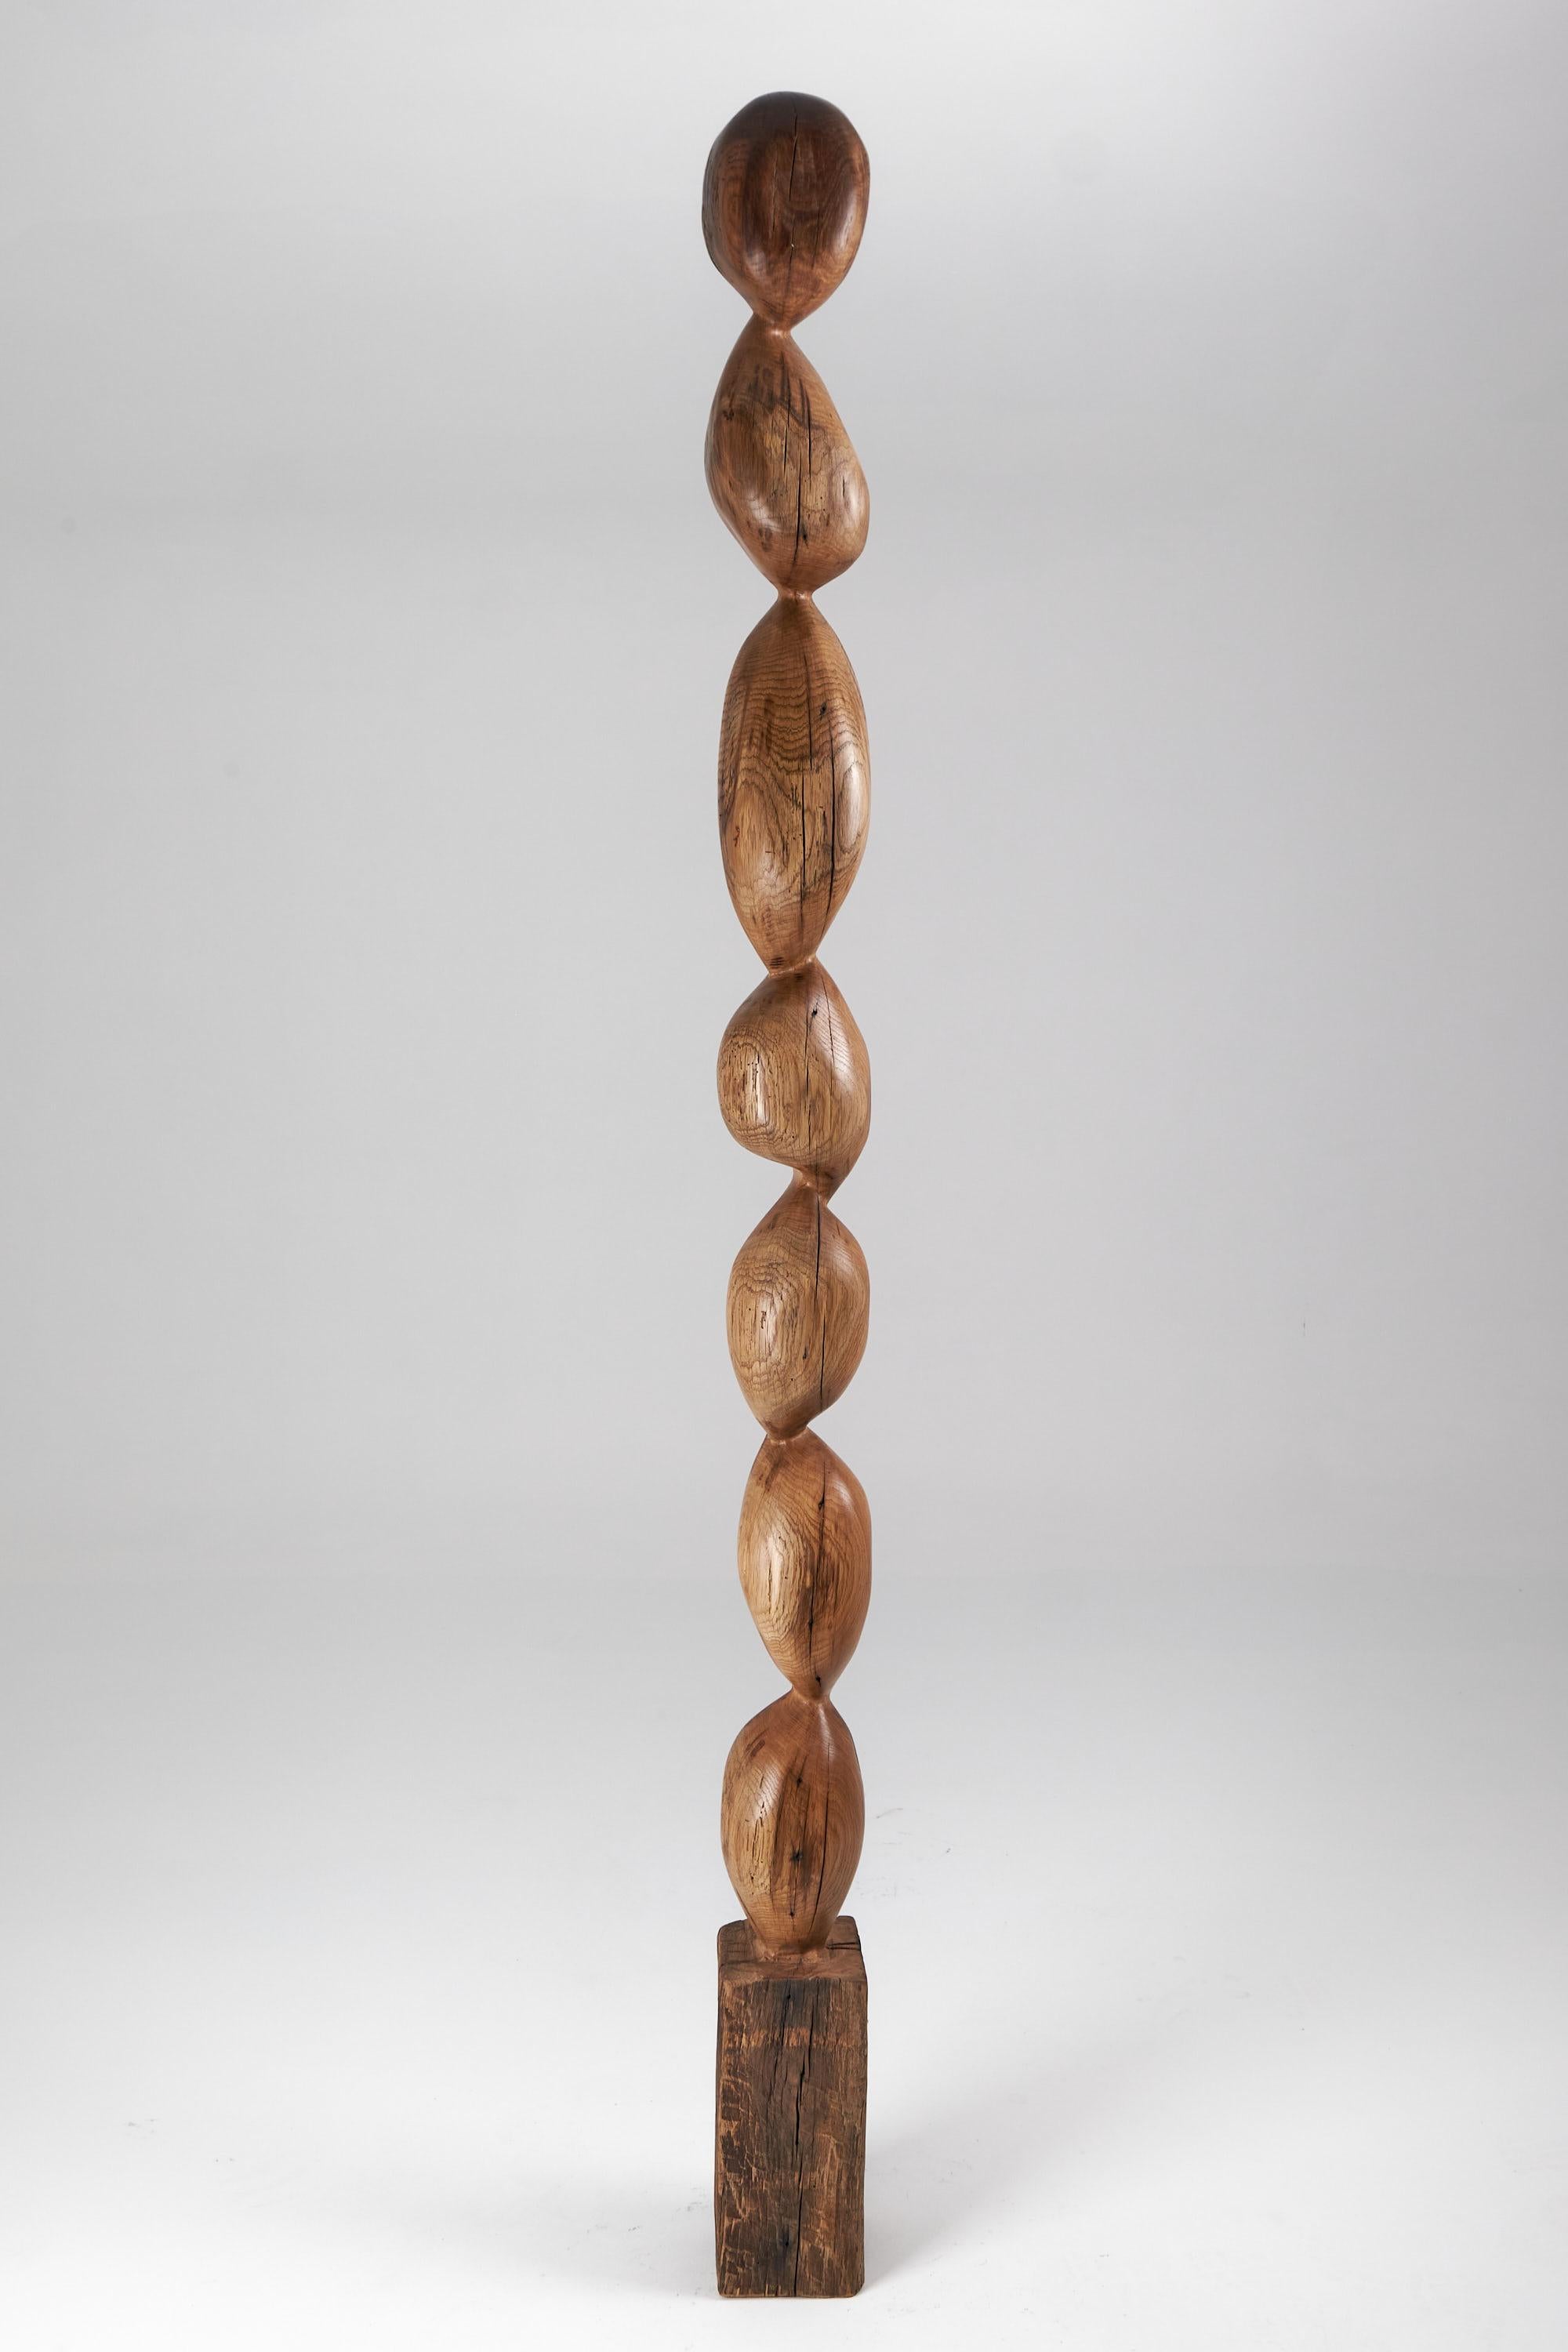 Still Stand Abstract Biomorphic Wood Sculpture, Chainsaw Carved From Single Piece of Oak Wood